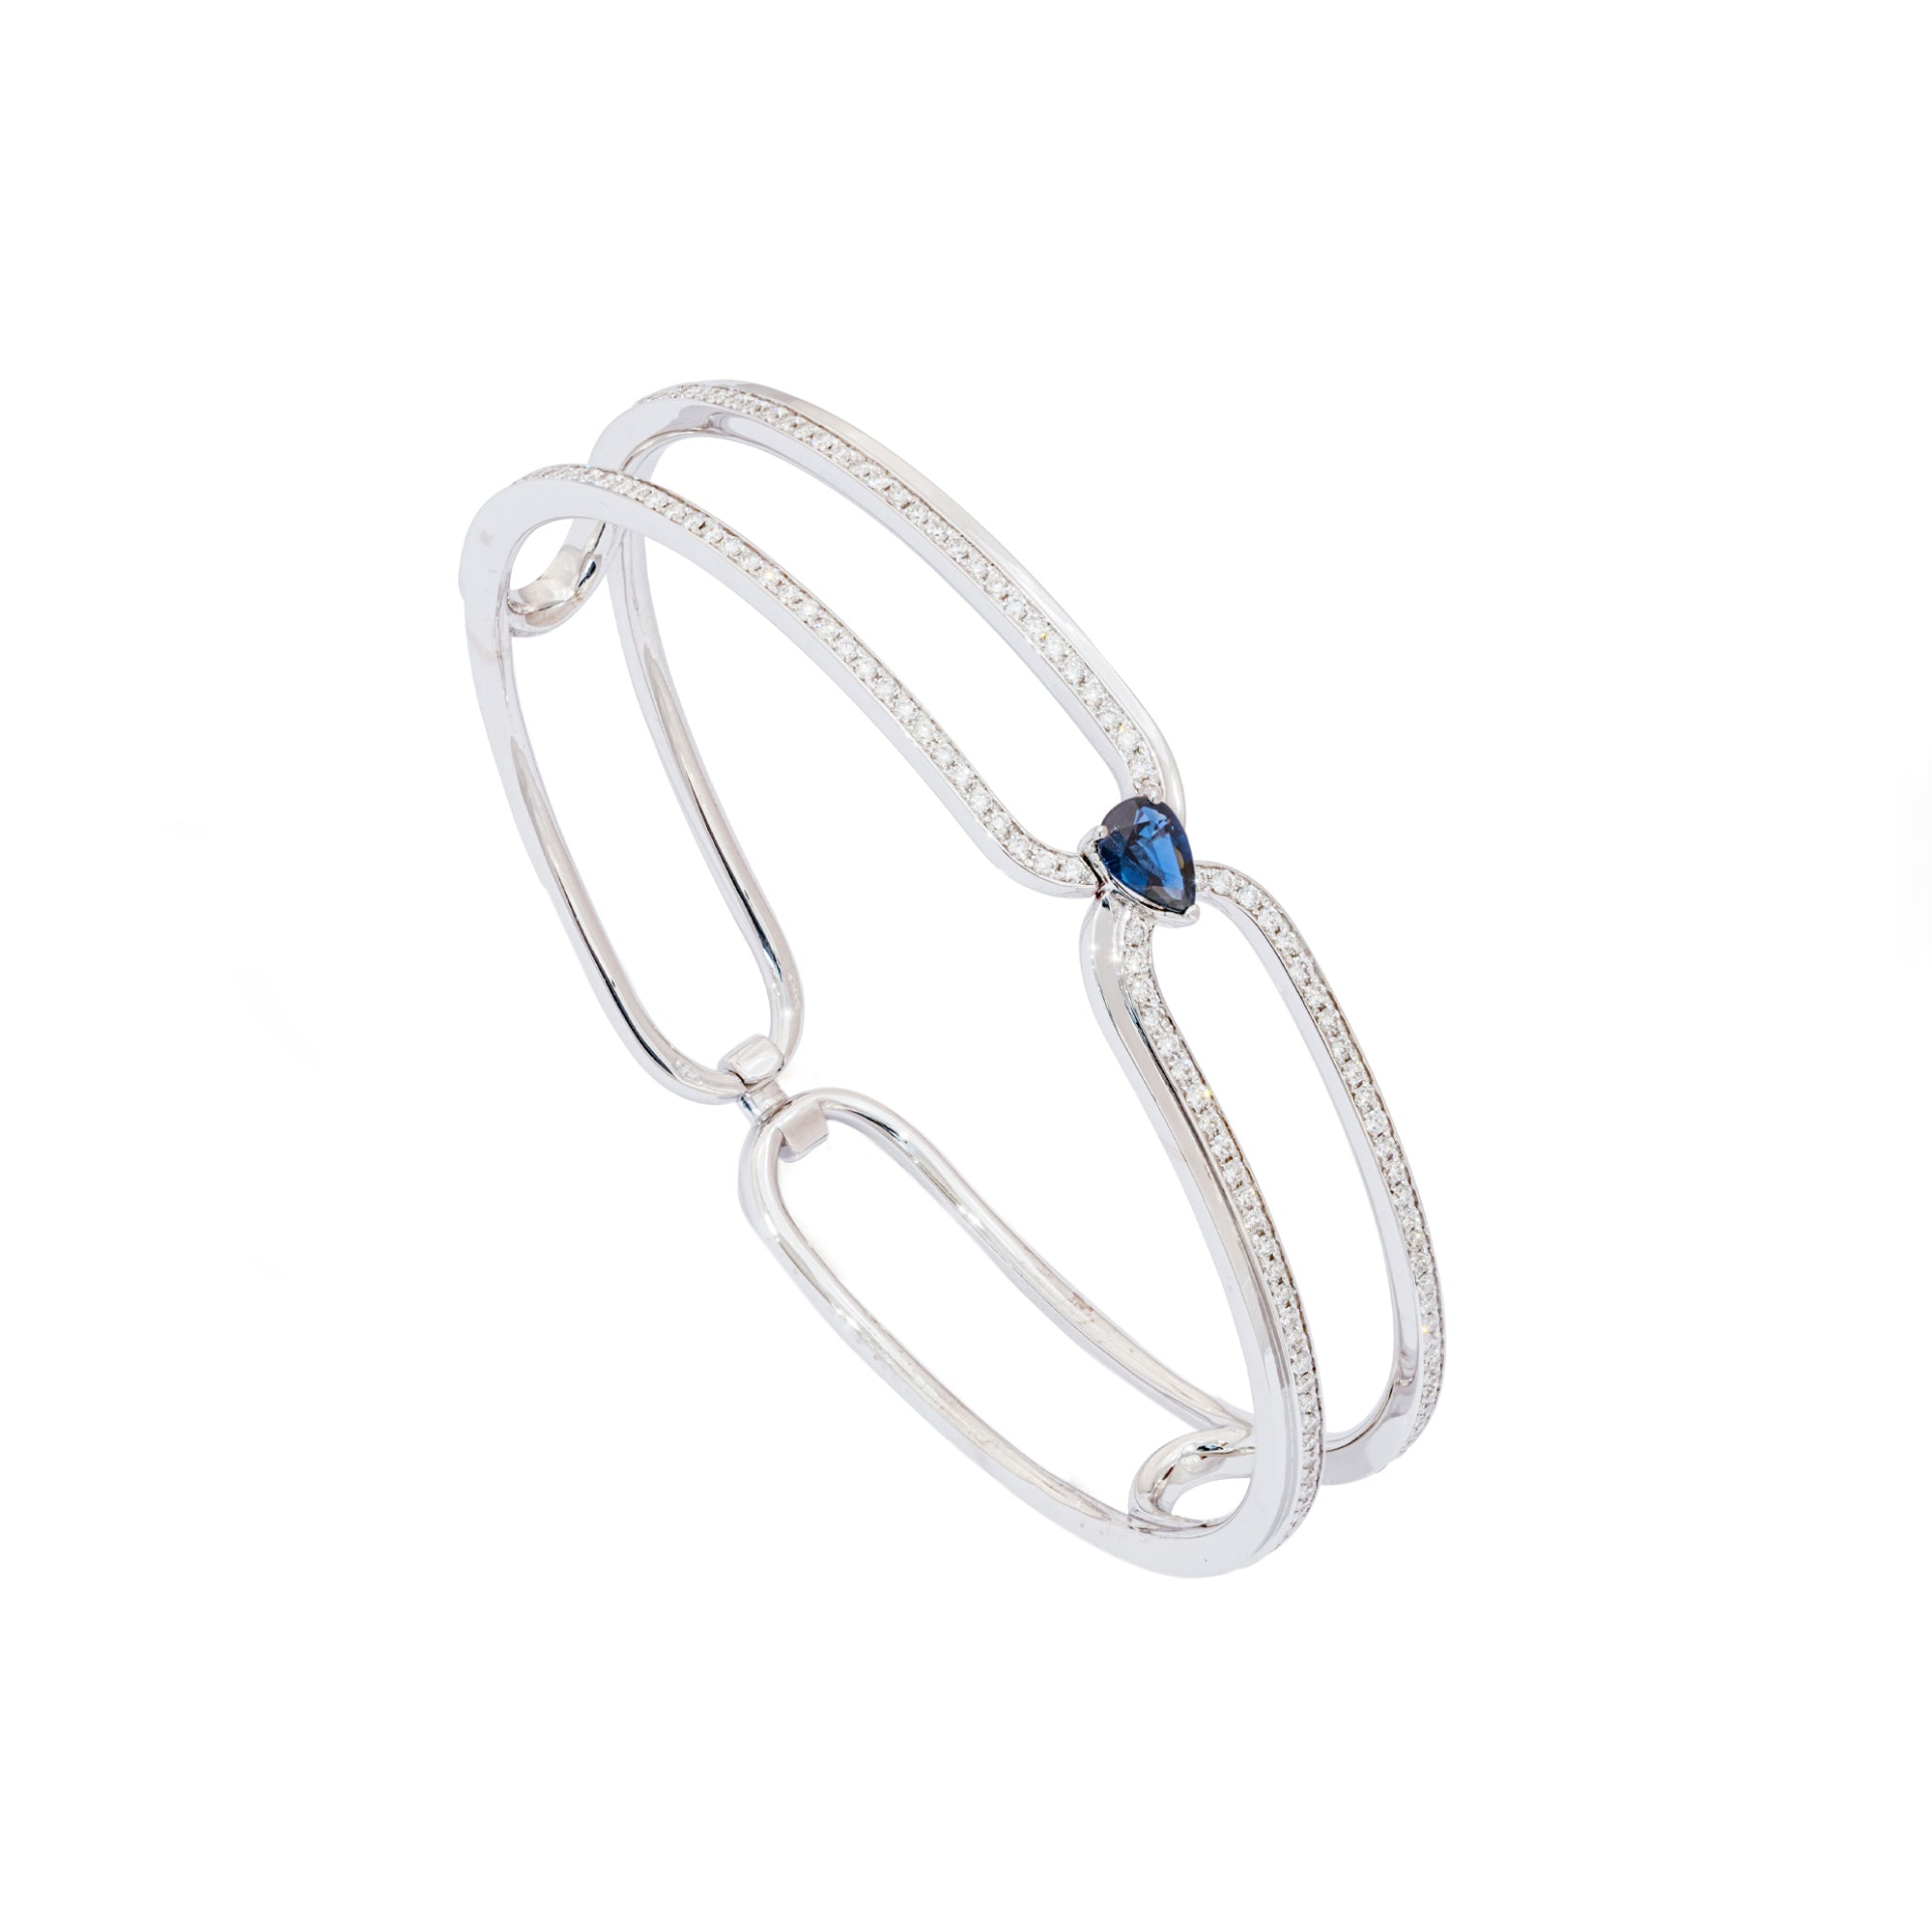 Clip White Gold Bracelet With Diamonds And Sapphire